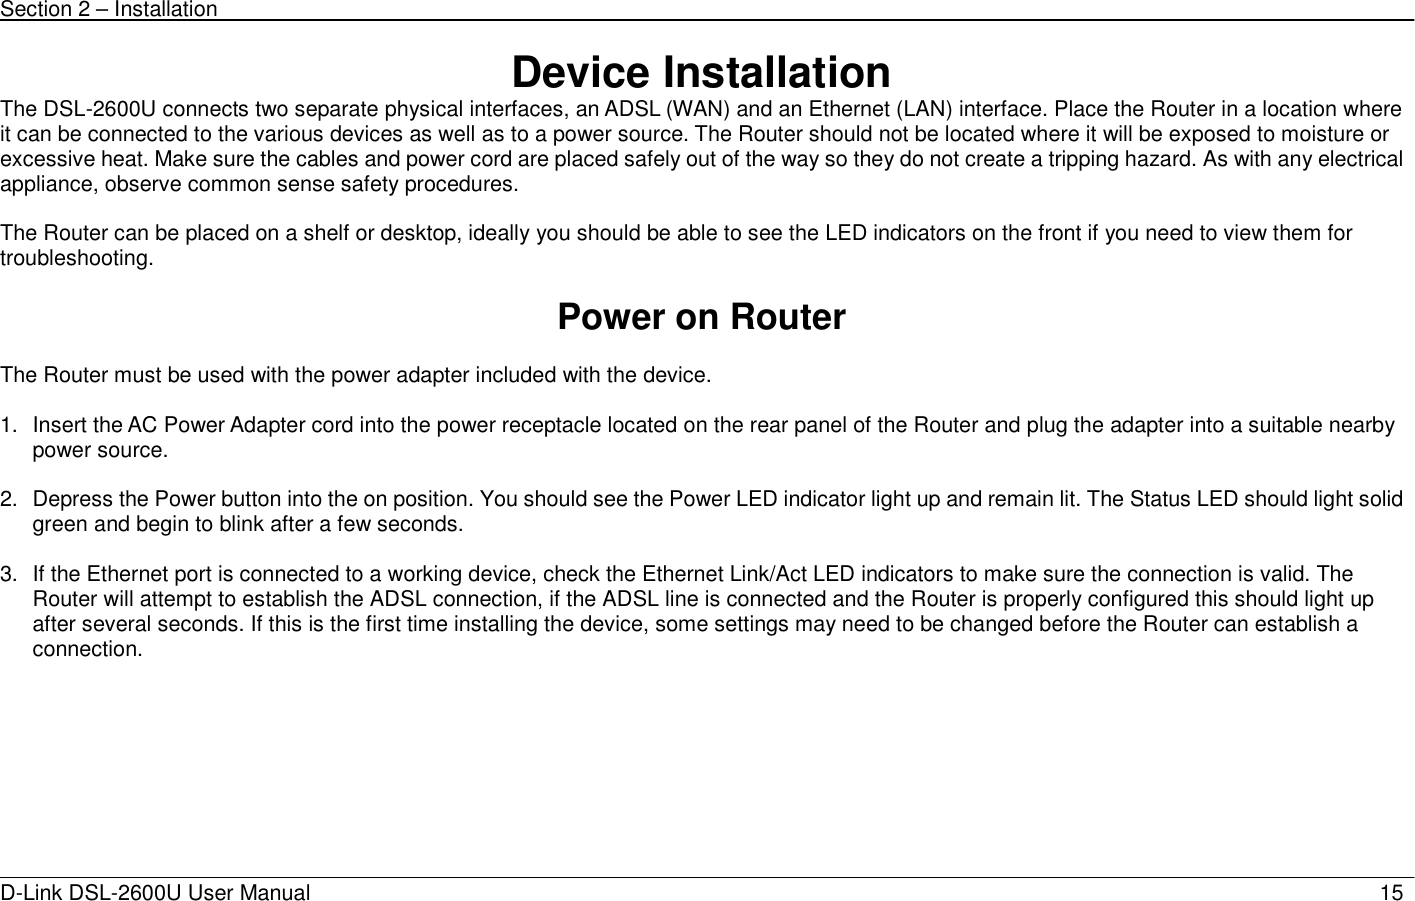 Section 2 – Installation   D-Link DSL-2600U User Manual                            15Device Installation The DSL-2600U connects two separate physical interfaces, an ADSL (WAN) and an Ethernet (LAN) interface. Place the Router in a location where it can be connected to the various devices as well as to a power source. The Router should not be located where it will be exposed to moisture or excessive heat. Make sure the cables and power cord are placed safely out of the way so they do not create a tripping hazard. As with any electrical appliance, observe common sense safety procedures.  The Router can be placed on a shelf or desktop, ideally you should be able to see the LED indicators on the front if you need to view them for troubleshooting.  Power on Router  The Router must be used with the power adapter included with the device.  1.  Insert the AC Power Adapter cord into the power receptacle located on the rear panel of the Router and plug the adapter into a suitable nearby power source.  2.  Depress the Power button into the on position. You should see the Power LED indicator light up and remain lit. The Status LED should light solid green and begin to blink after a few seconds.  3.  If the Ethernet port is connected to a working device, check the Ethernet Link/Act LED indicators to make sure the connection is valid. The Router will attempt to establish the ADSL connection, if the ADSL line is connected and the Router is properly configured this should light up after several seconds. If this is the first time installing the device, some settings may need to be changed before the Router can establish a connection.    